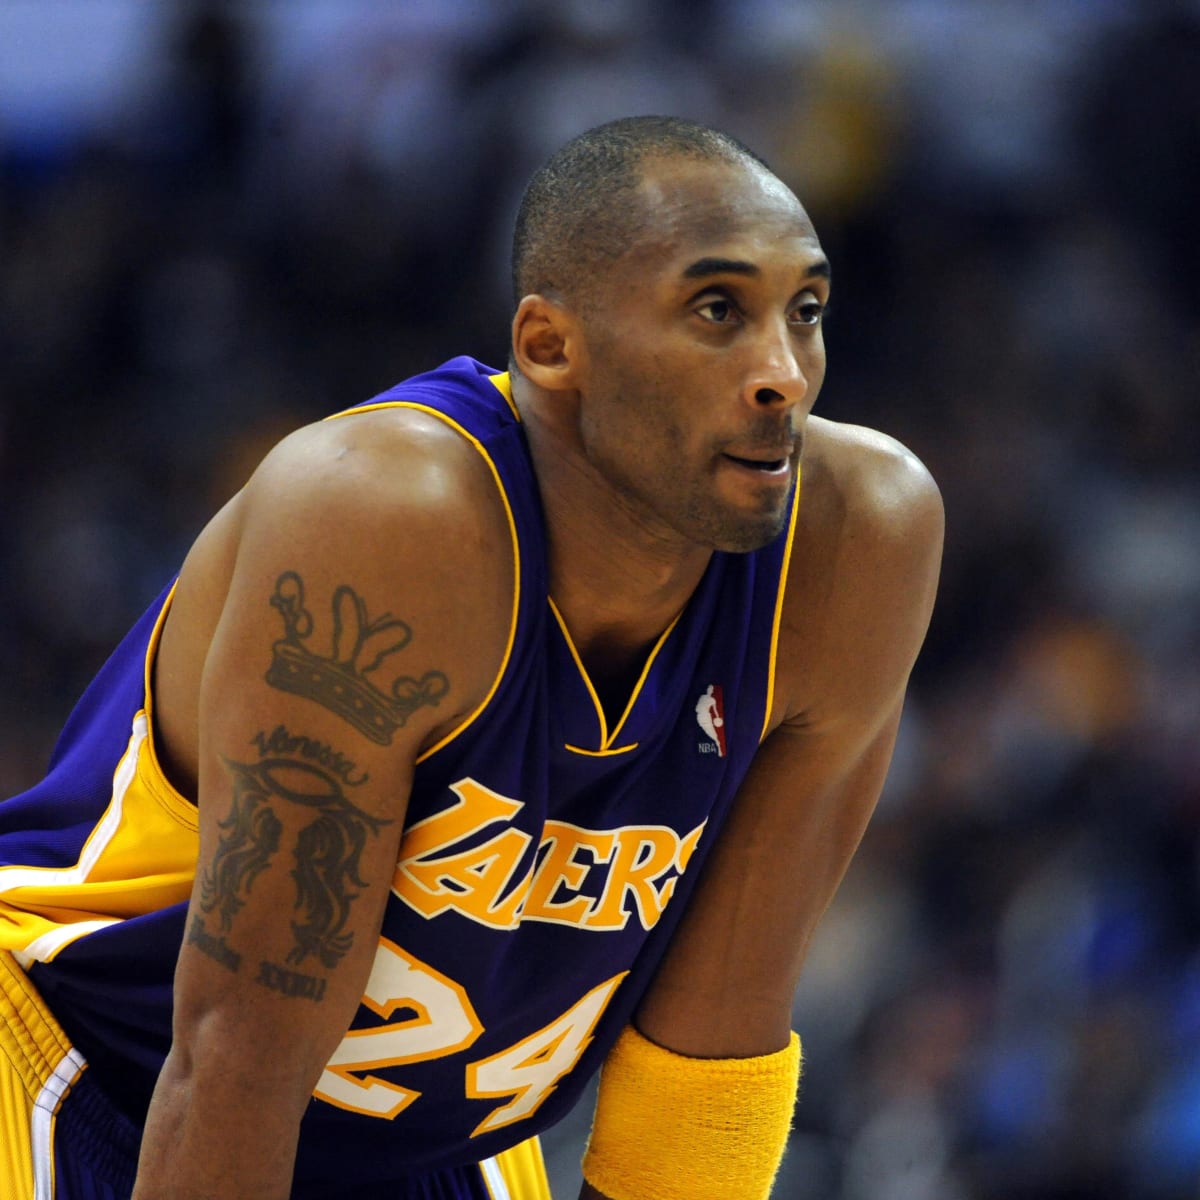 Did Kobe Bryant have a weakness? Exploring potential flaws in the